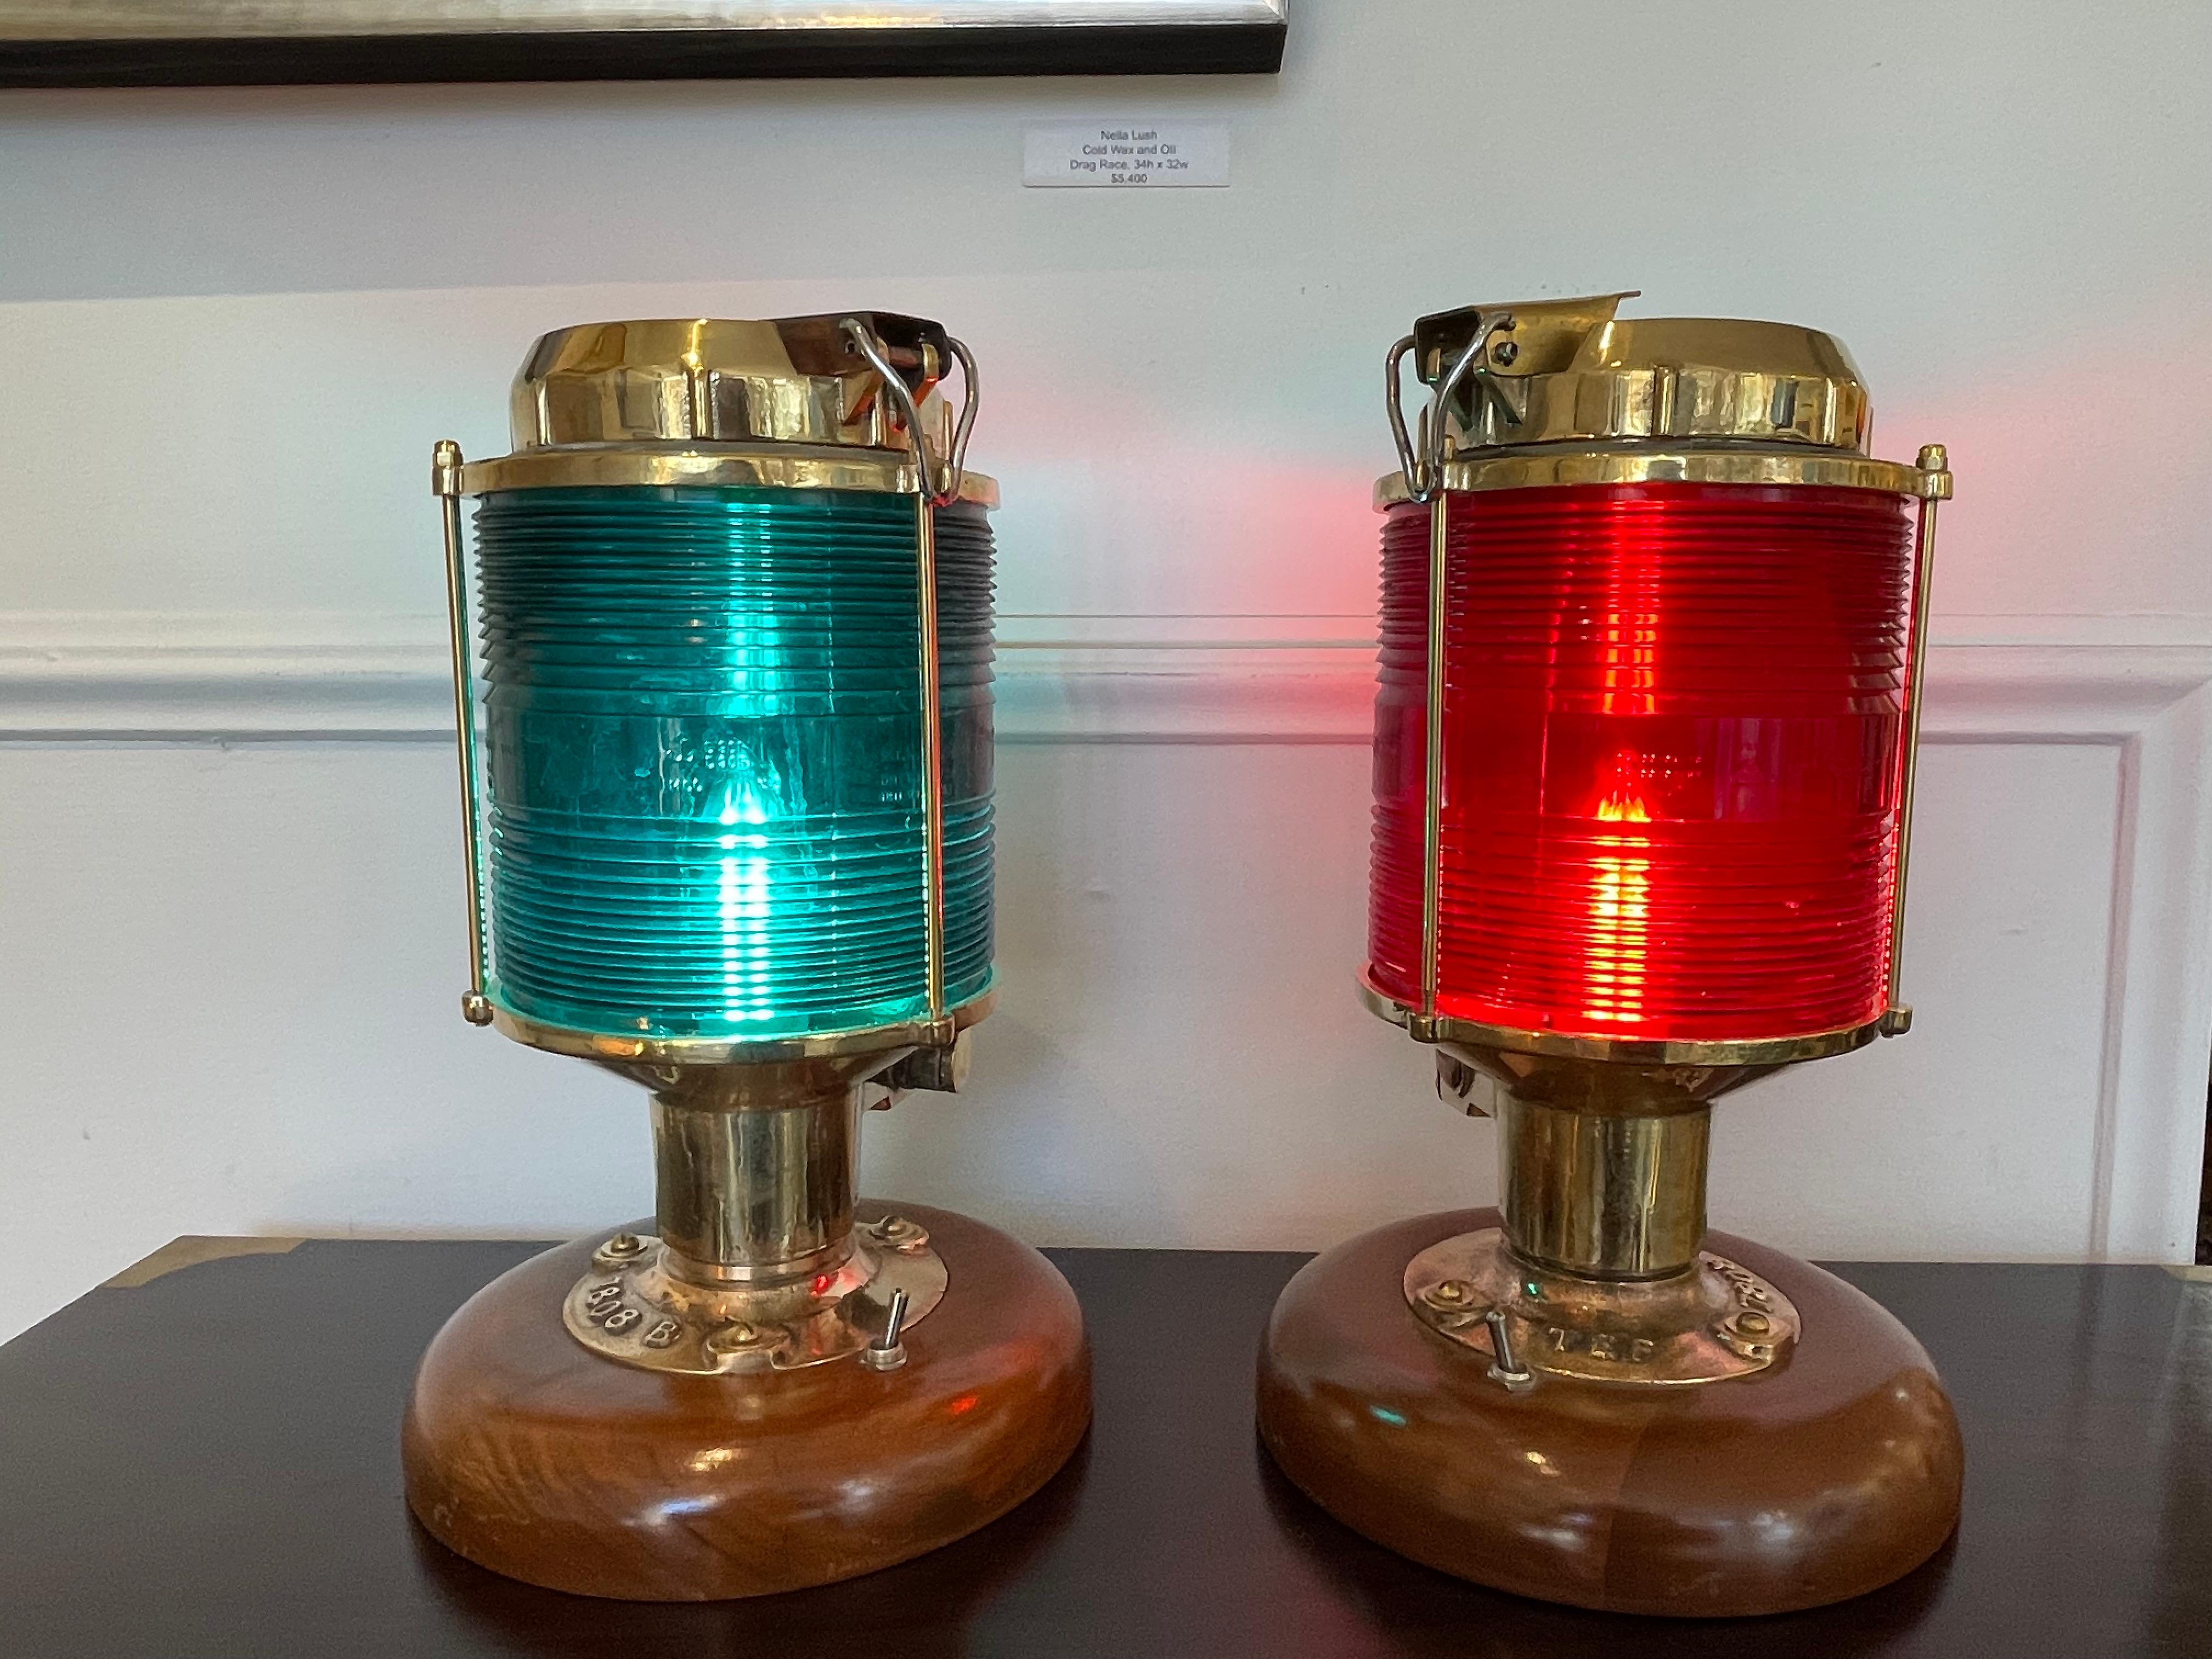 Pair of solid brass port and starboard navigational ship's post lights with the expected red and green Fresnel glass lens. Maker is Tranberg, Circa 1980's. Norwegian. Originally European wiring, these have been rewired for American use and the